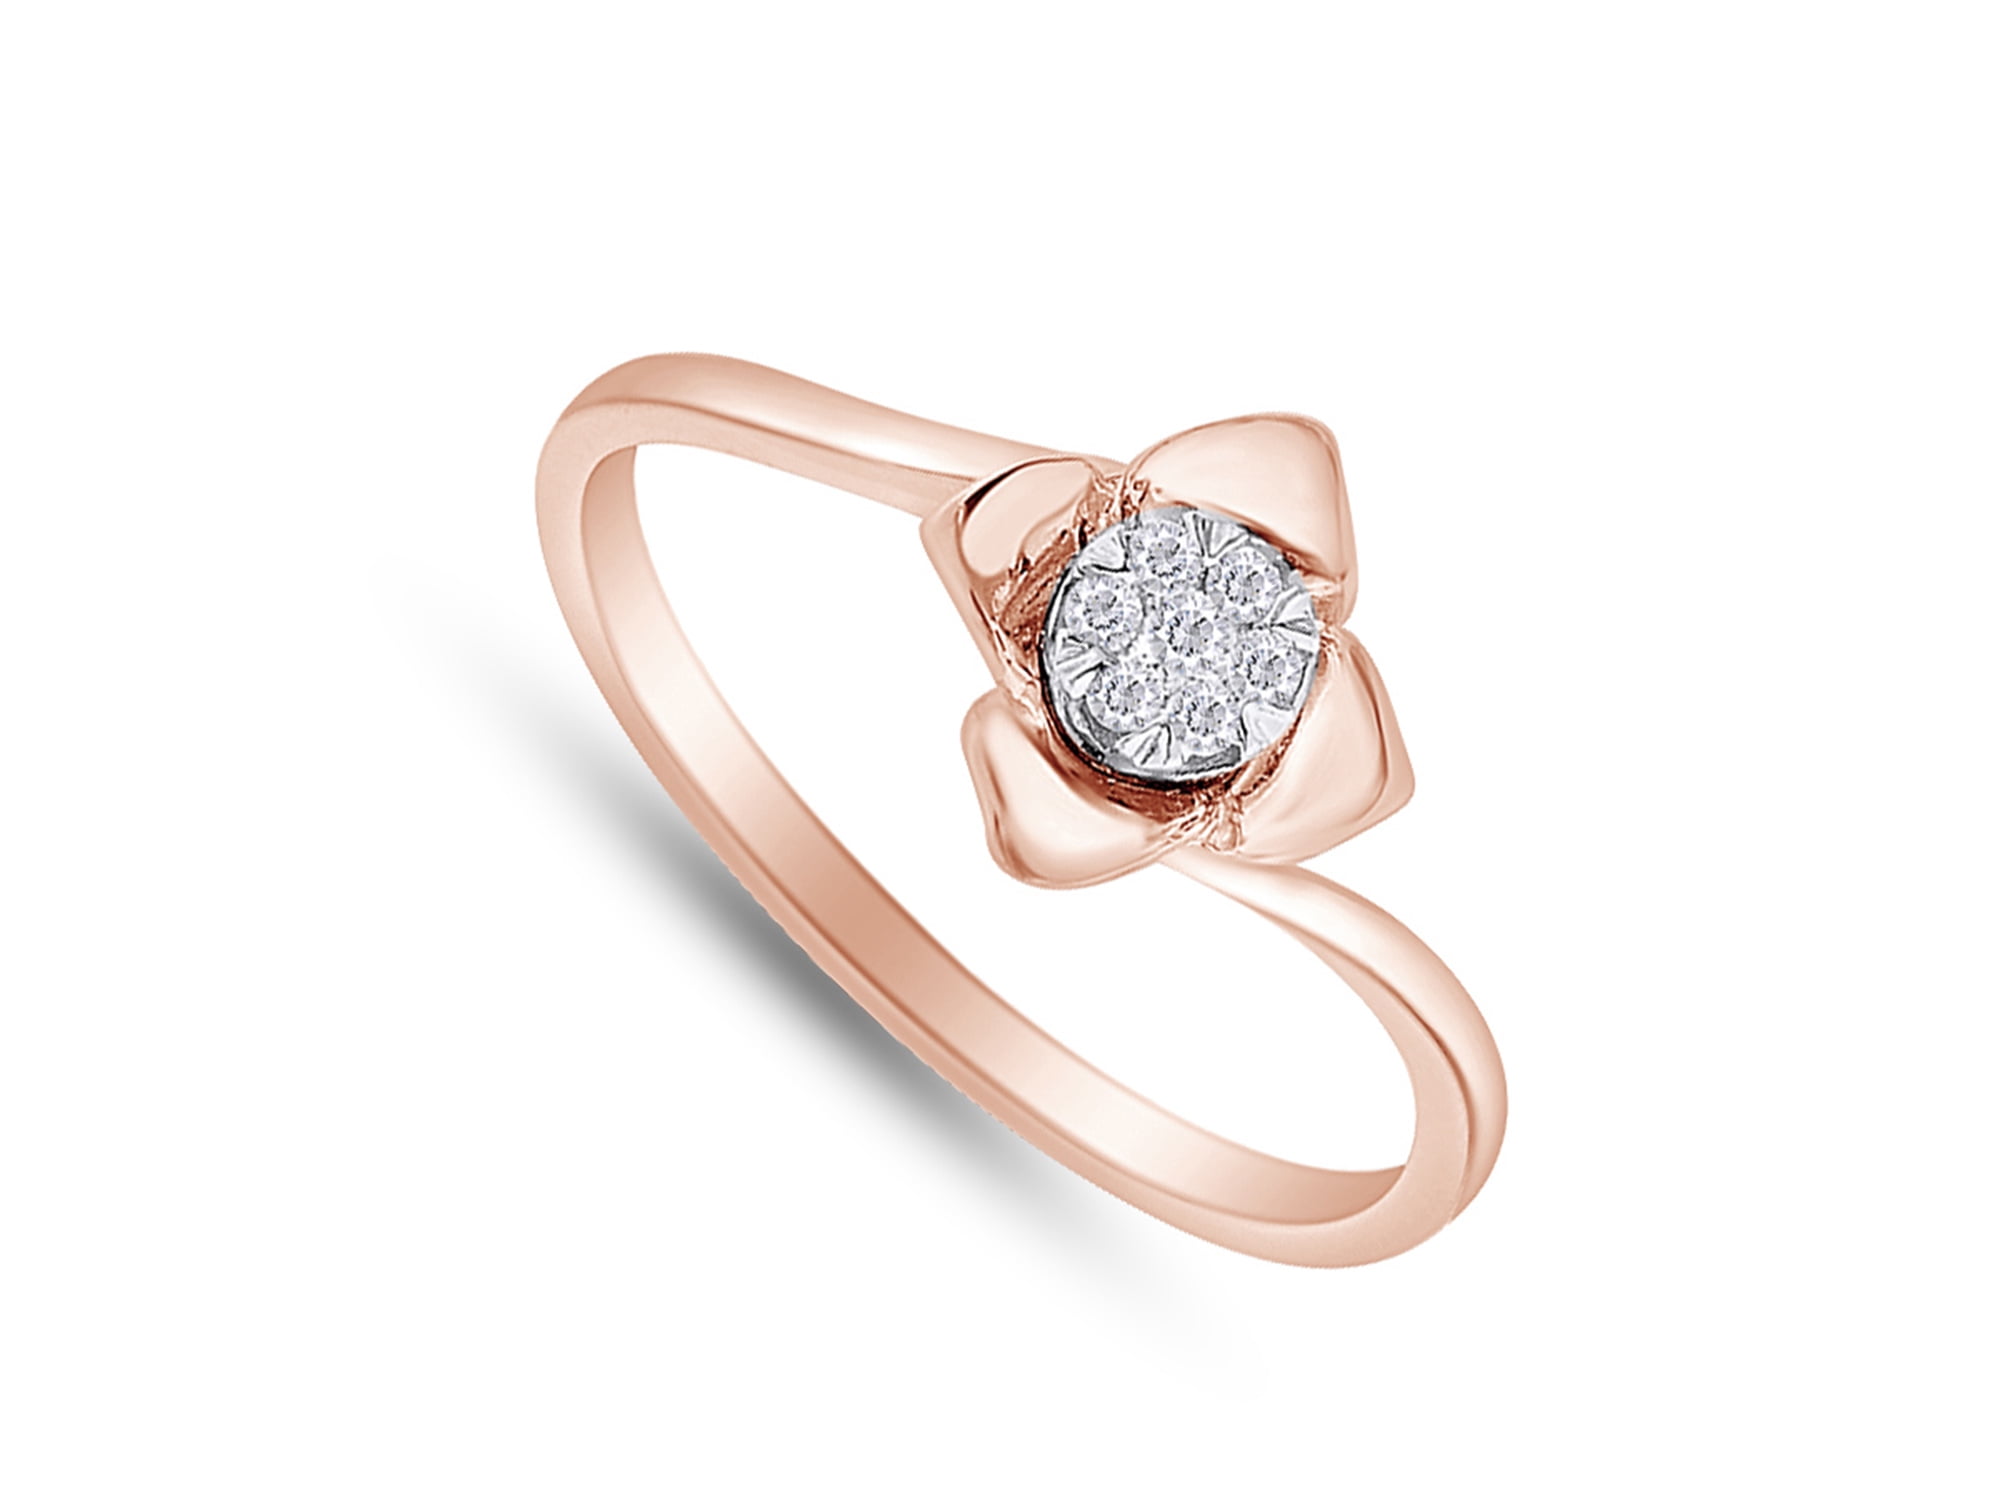 0.05 Cttw Jewel Zone US Black Natural Diamond Fashion Anniversary Ring in 14k Rose Gold Over Sterling Silver